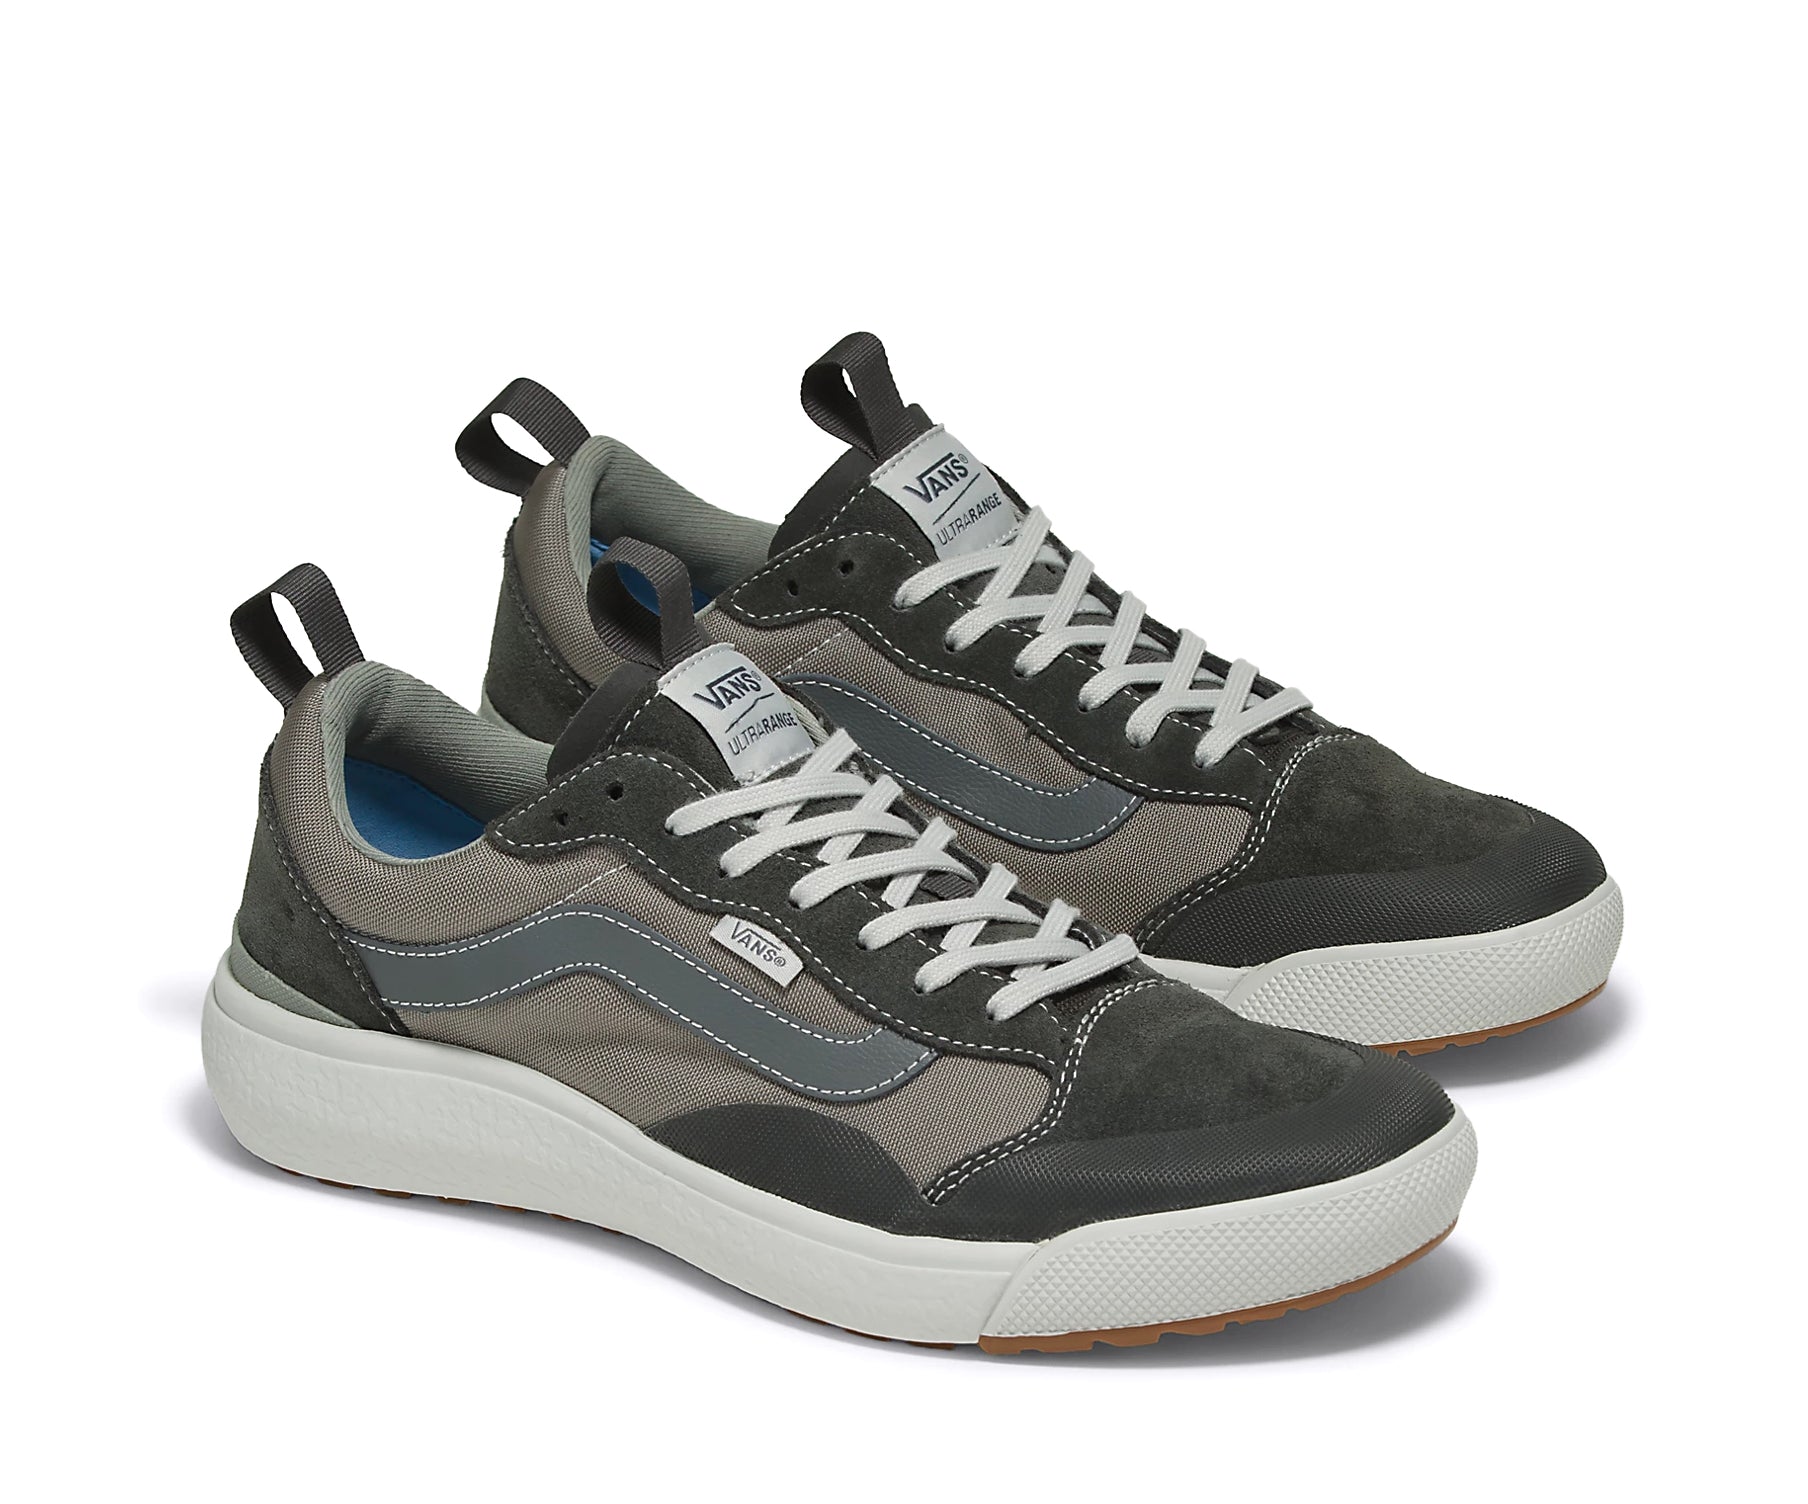 A suede and textile multicolored grey Vans sneaker.